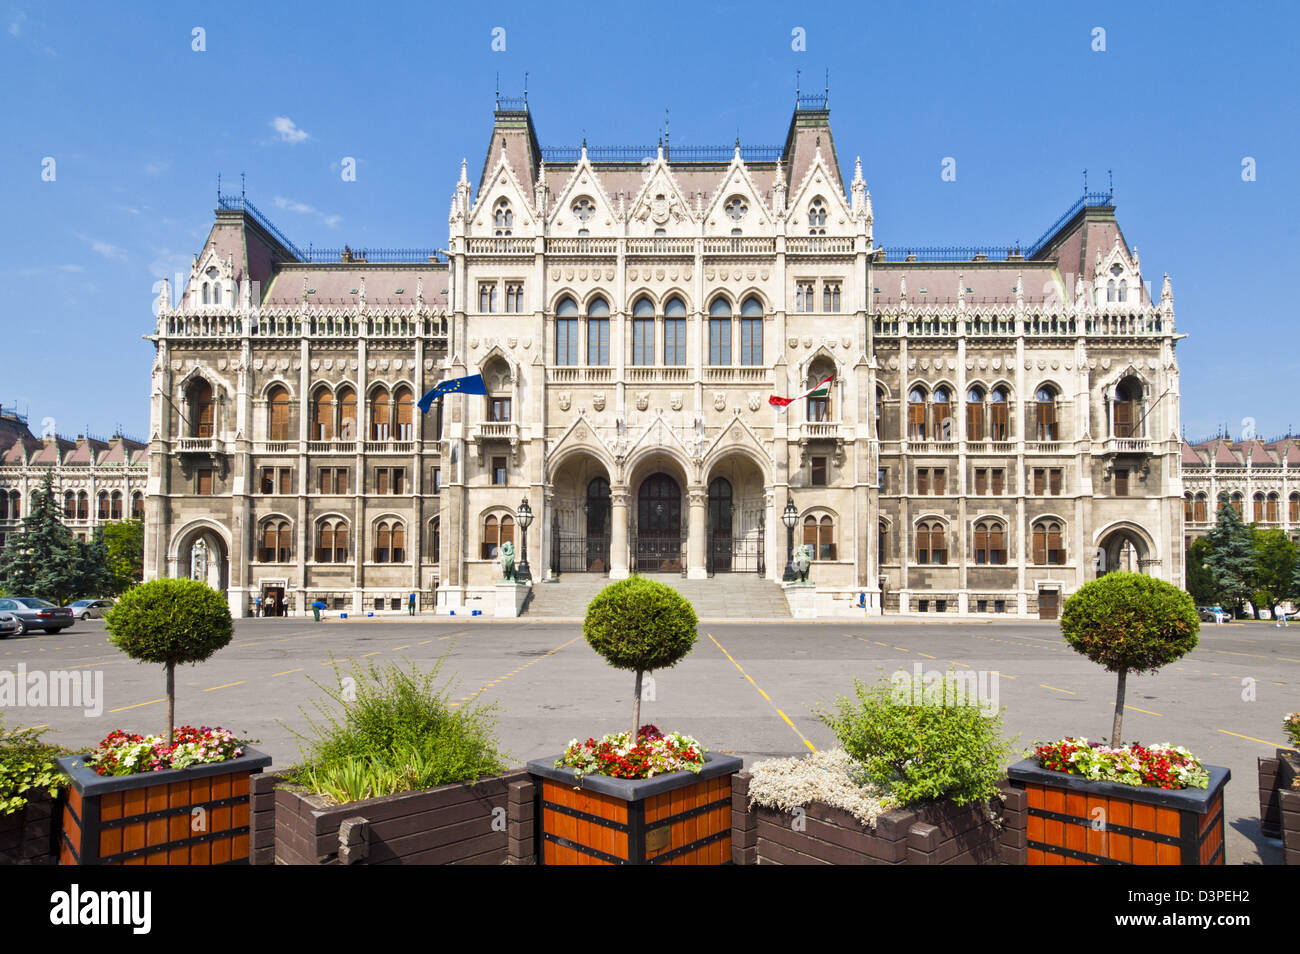 The neo-gothic Hungarian Parliament building entrance designed by Imre Steindl, Budapest, Hungary, Europe, EU Stock Photo